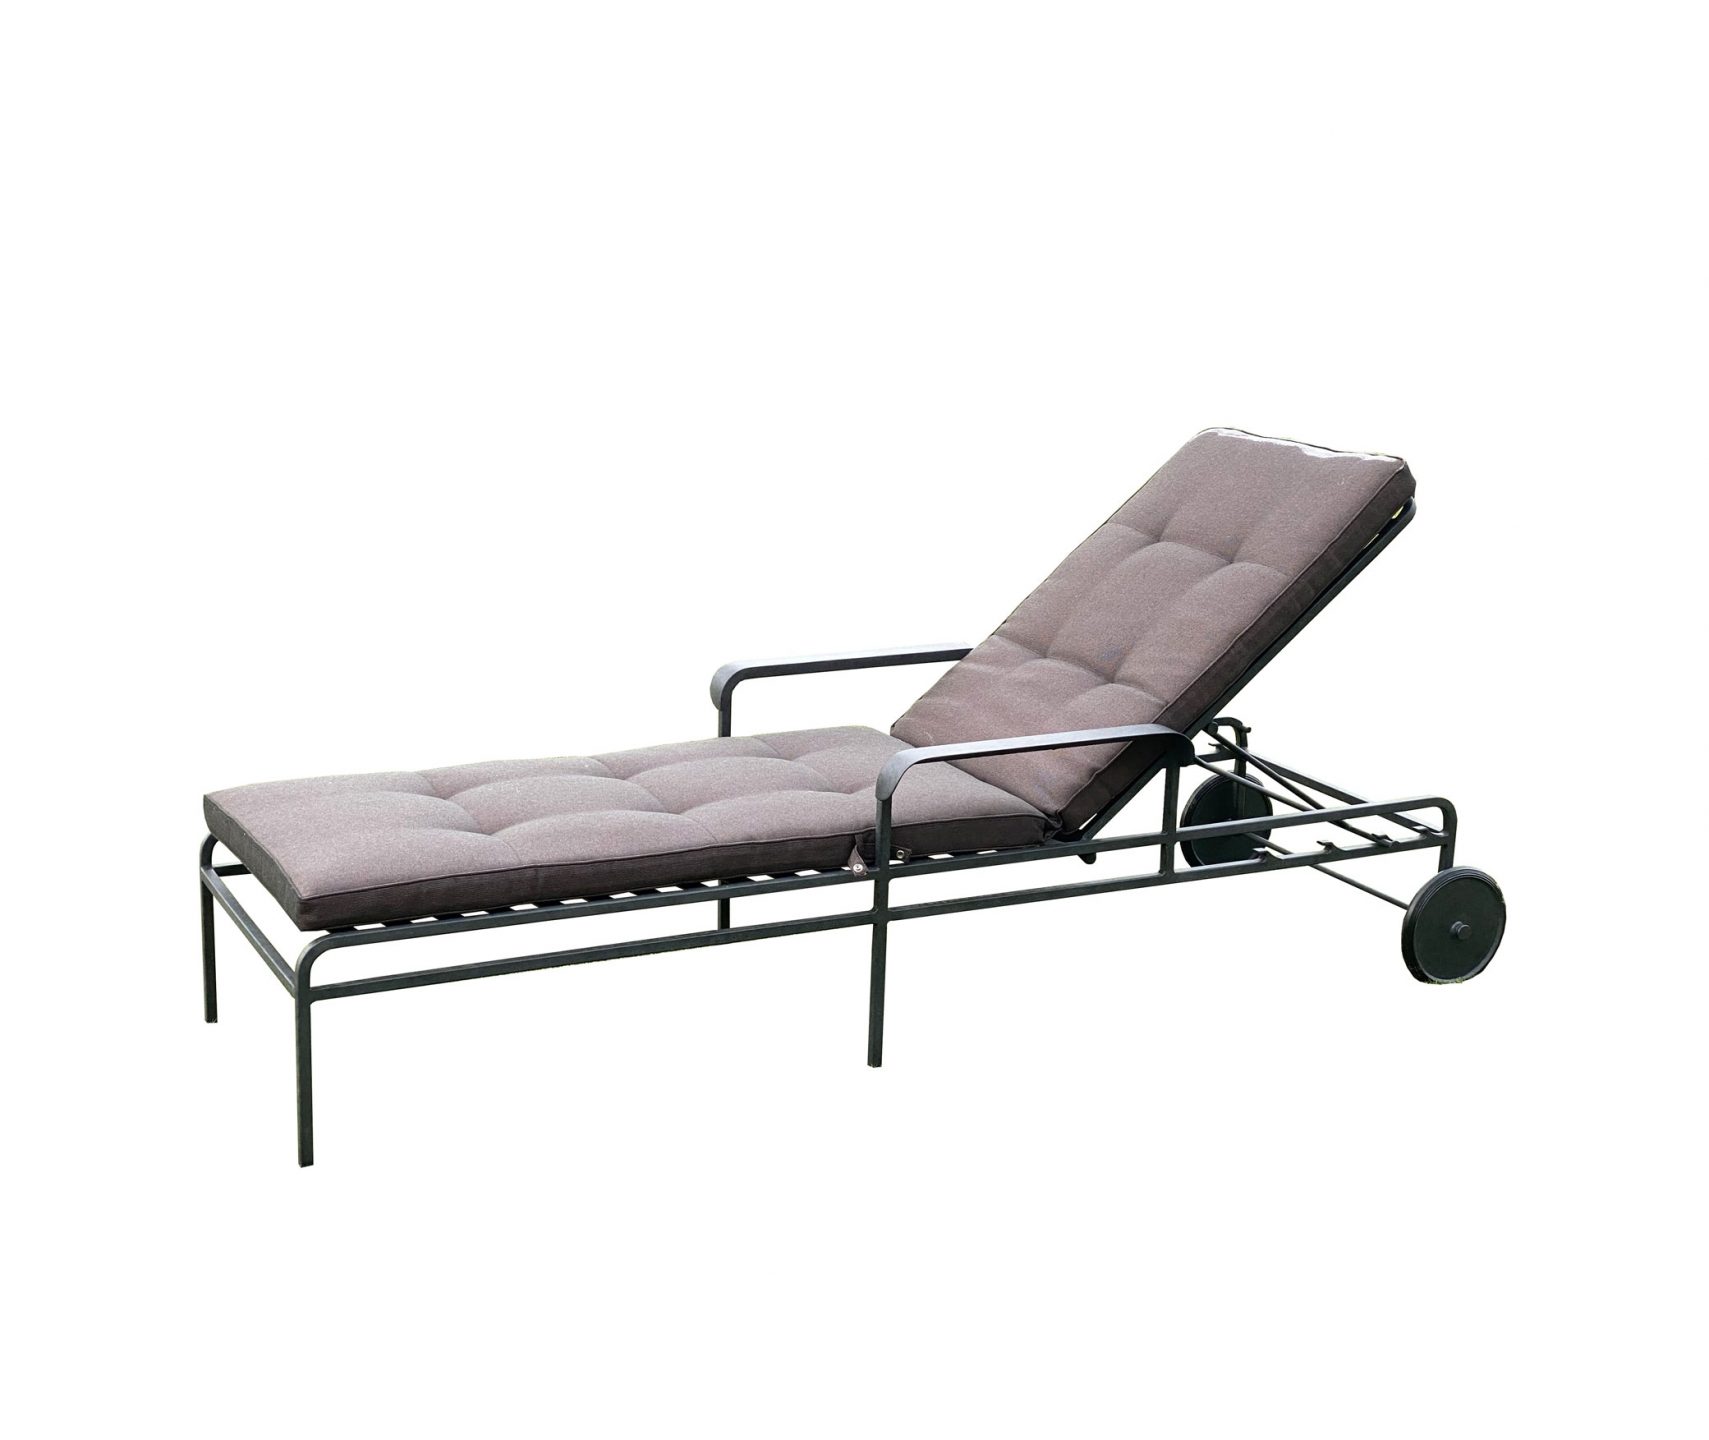 Munder-Skiles_Seibert-Chaise-Lounge-1_int_products